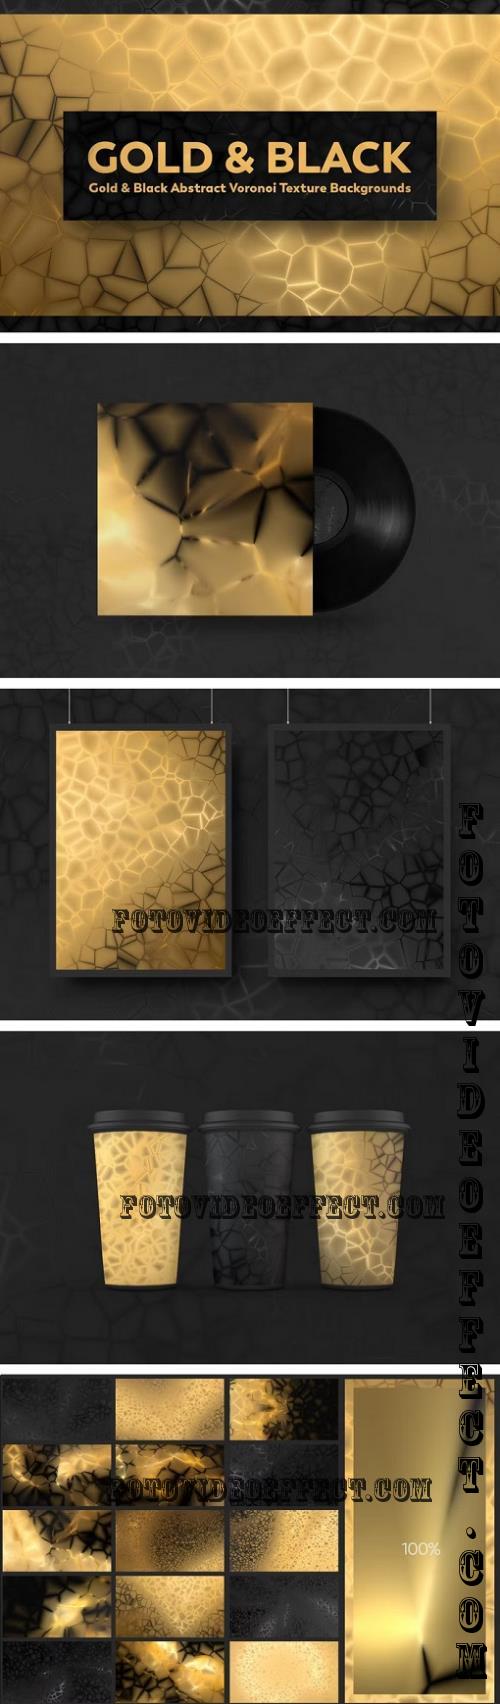 Gold & Black Abstract Voronoi Texture Backgrounds - S56AAY8